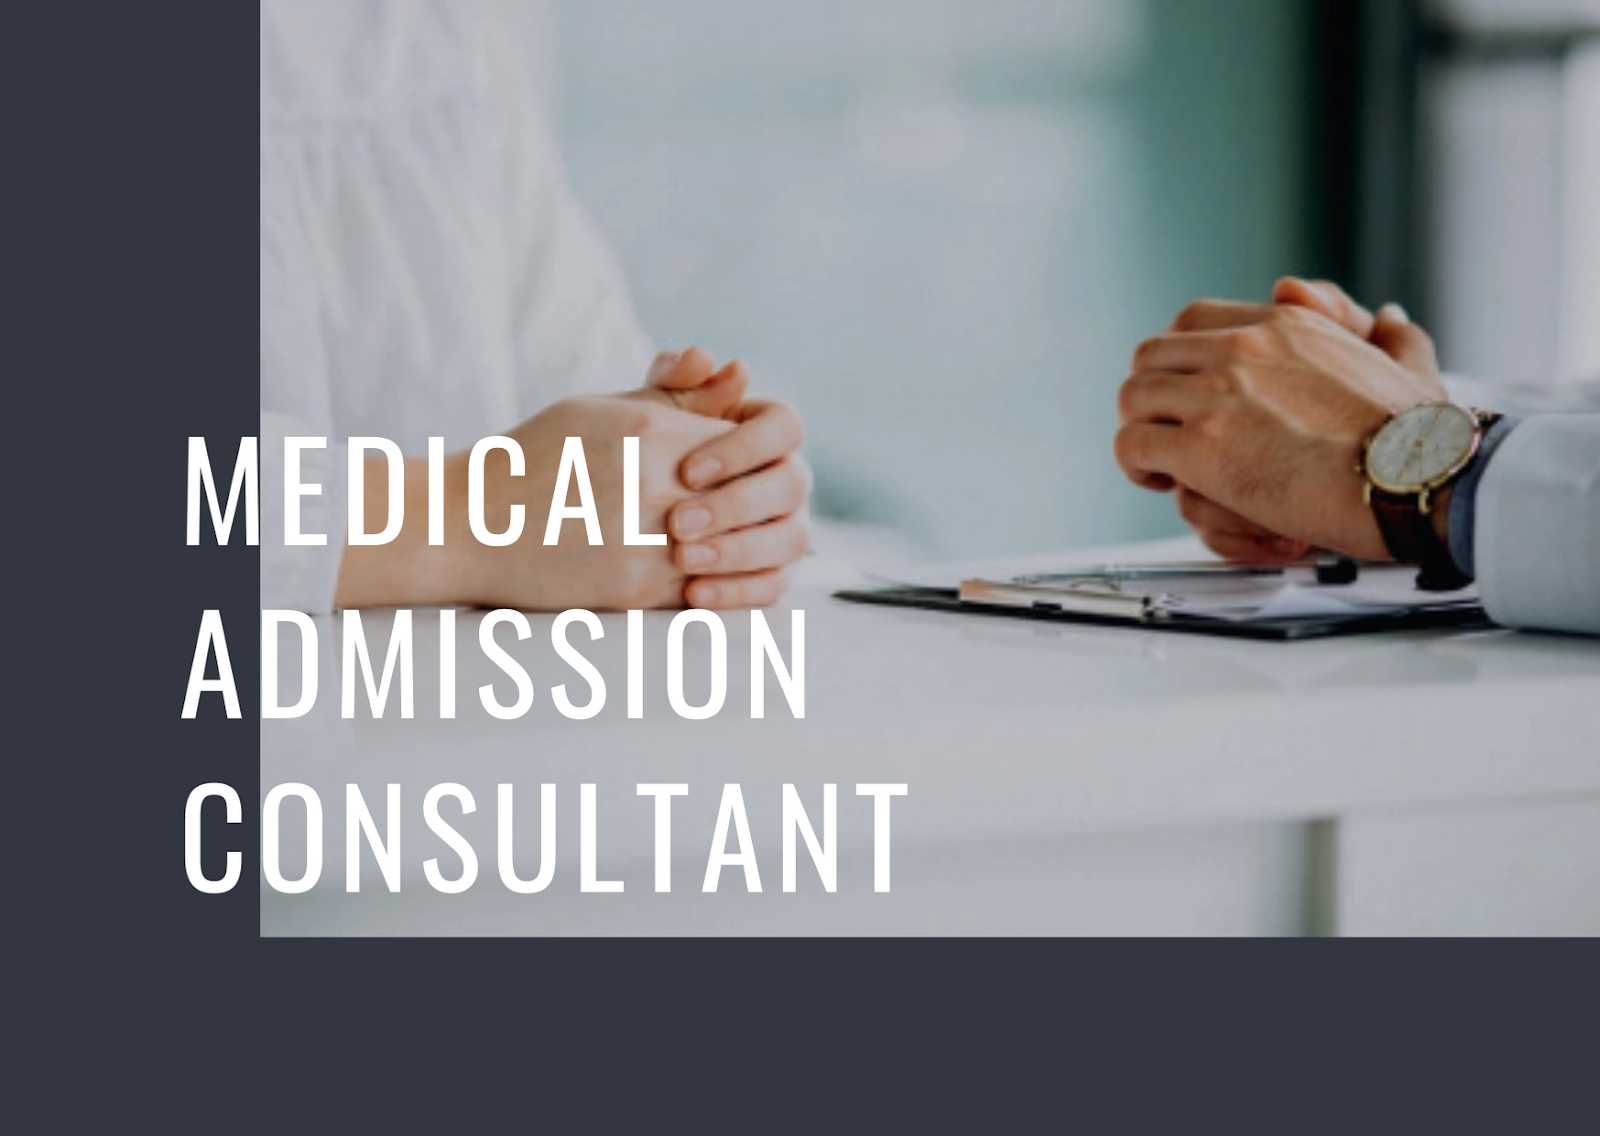 How To Find a Good Medical Admission Consultant?